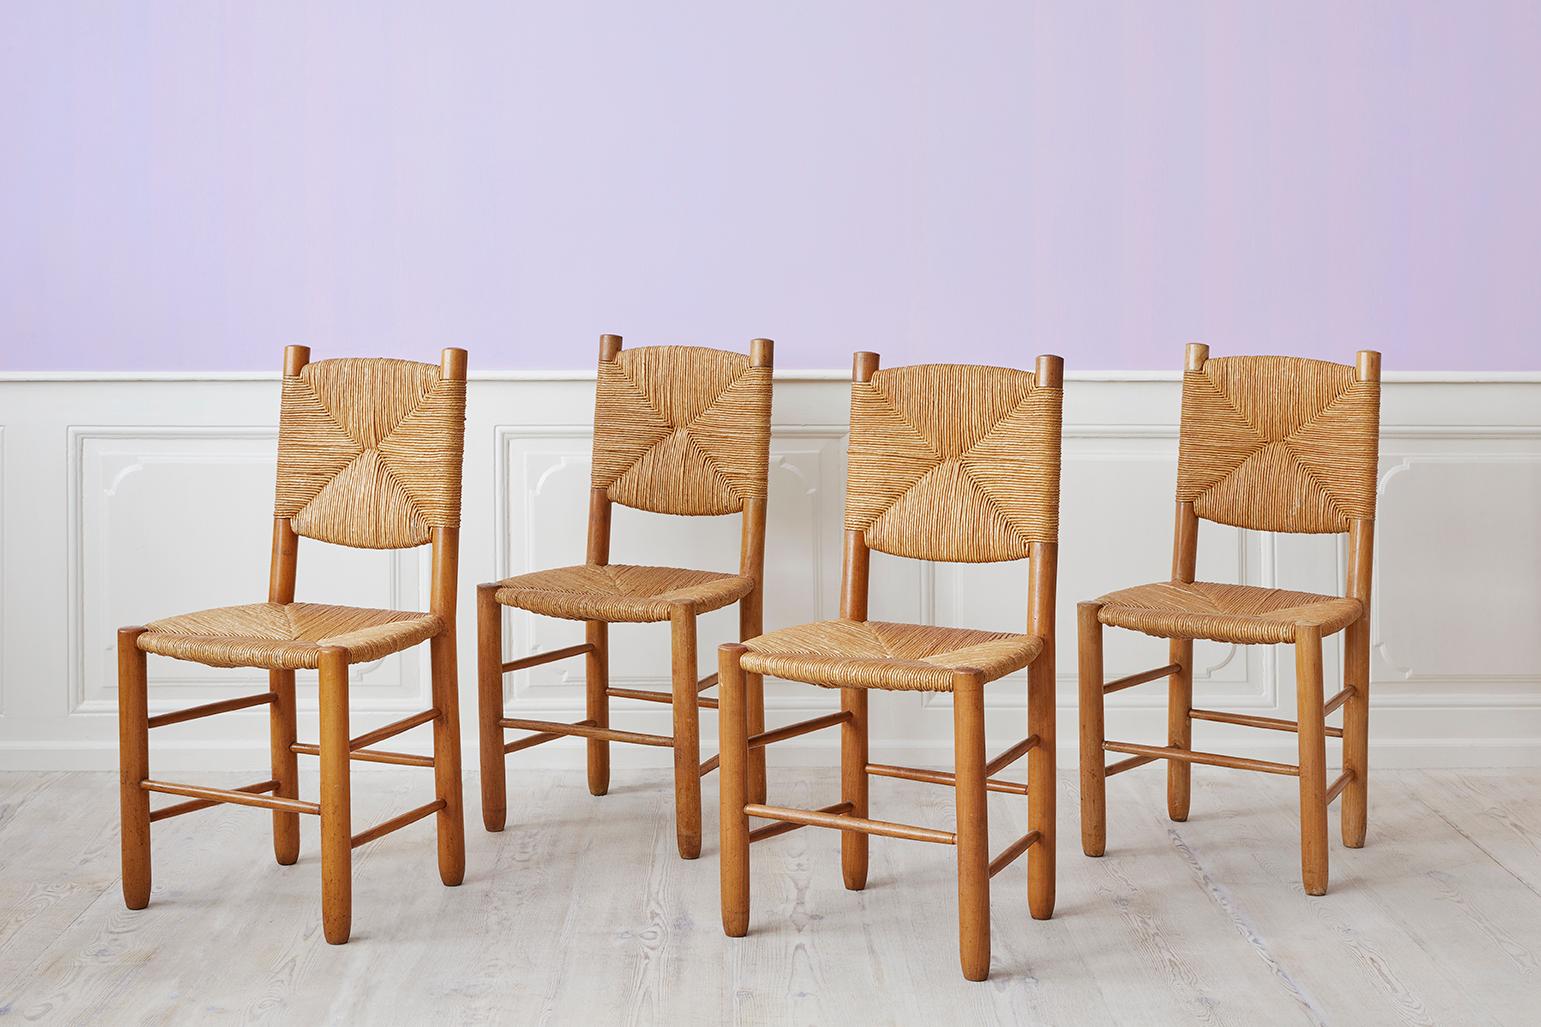 France, 1950's

A set of four chairs in ash with straw seat and back.

Provenance: The workshop of Charlotte Perriand’s cabinetmaker.

H 90 x W 43 x D 42 cm